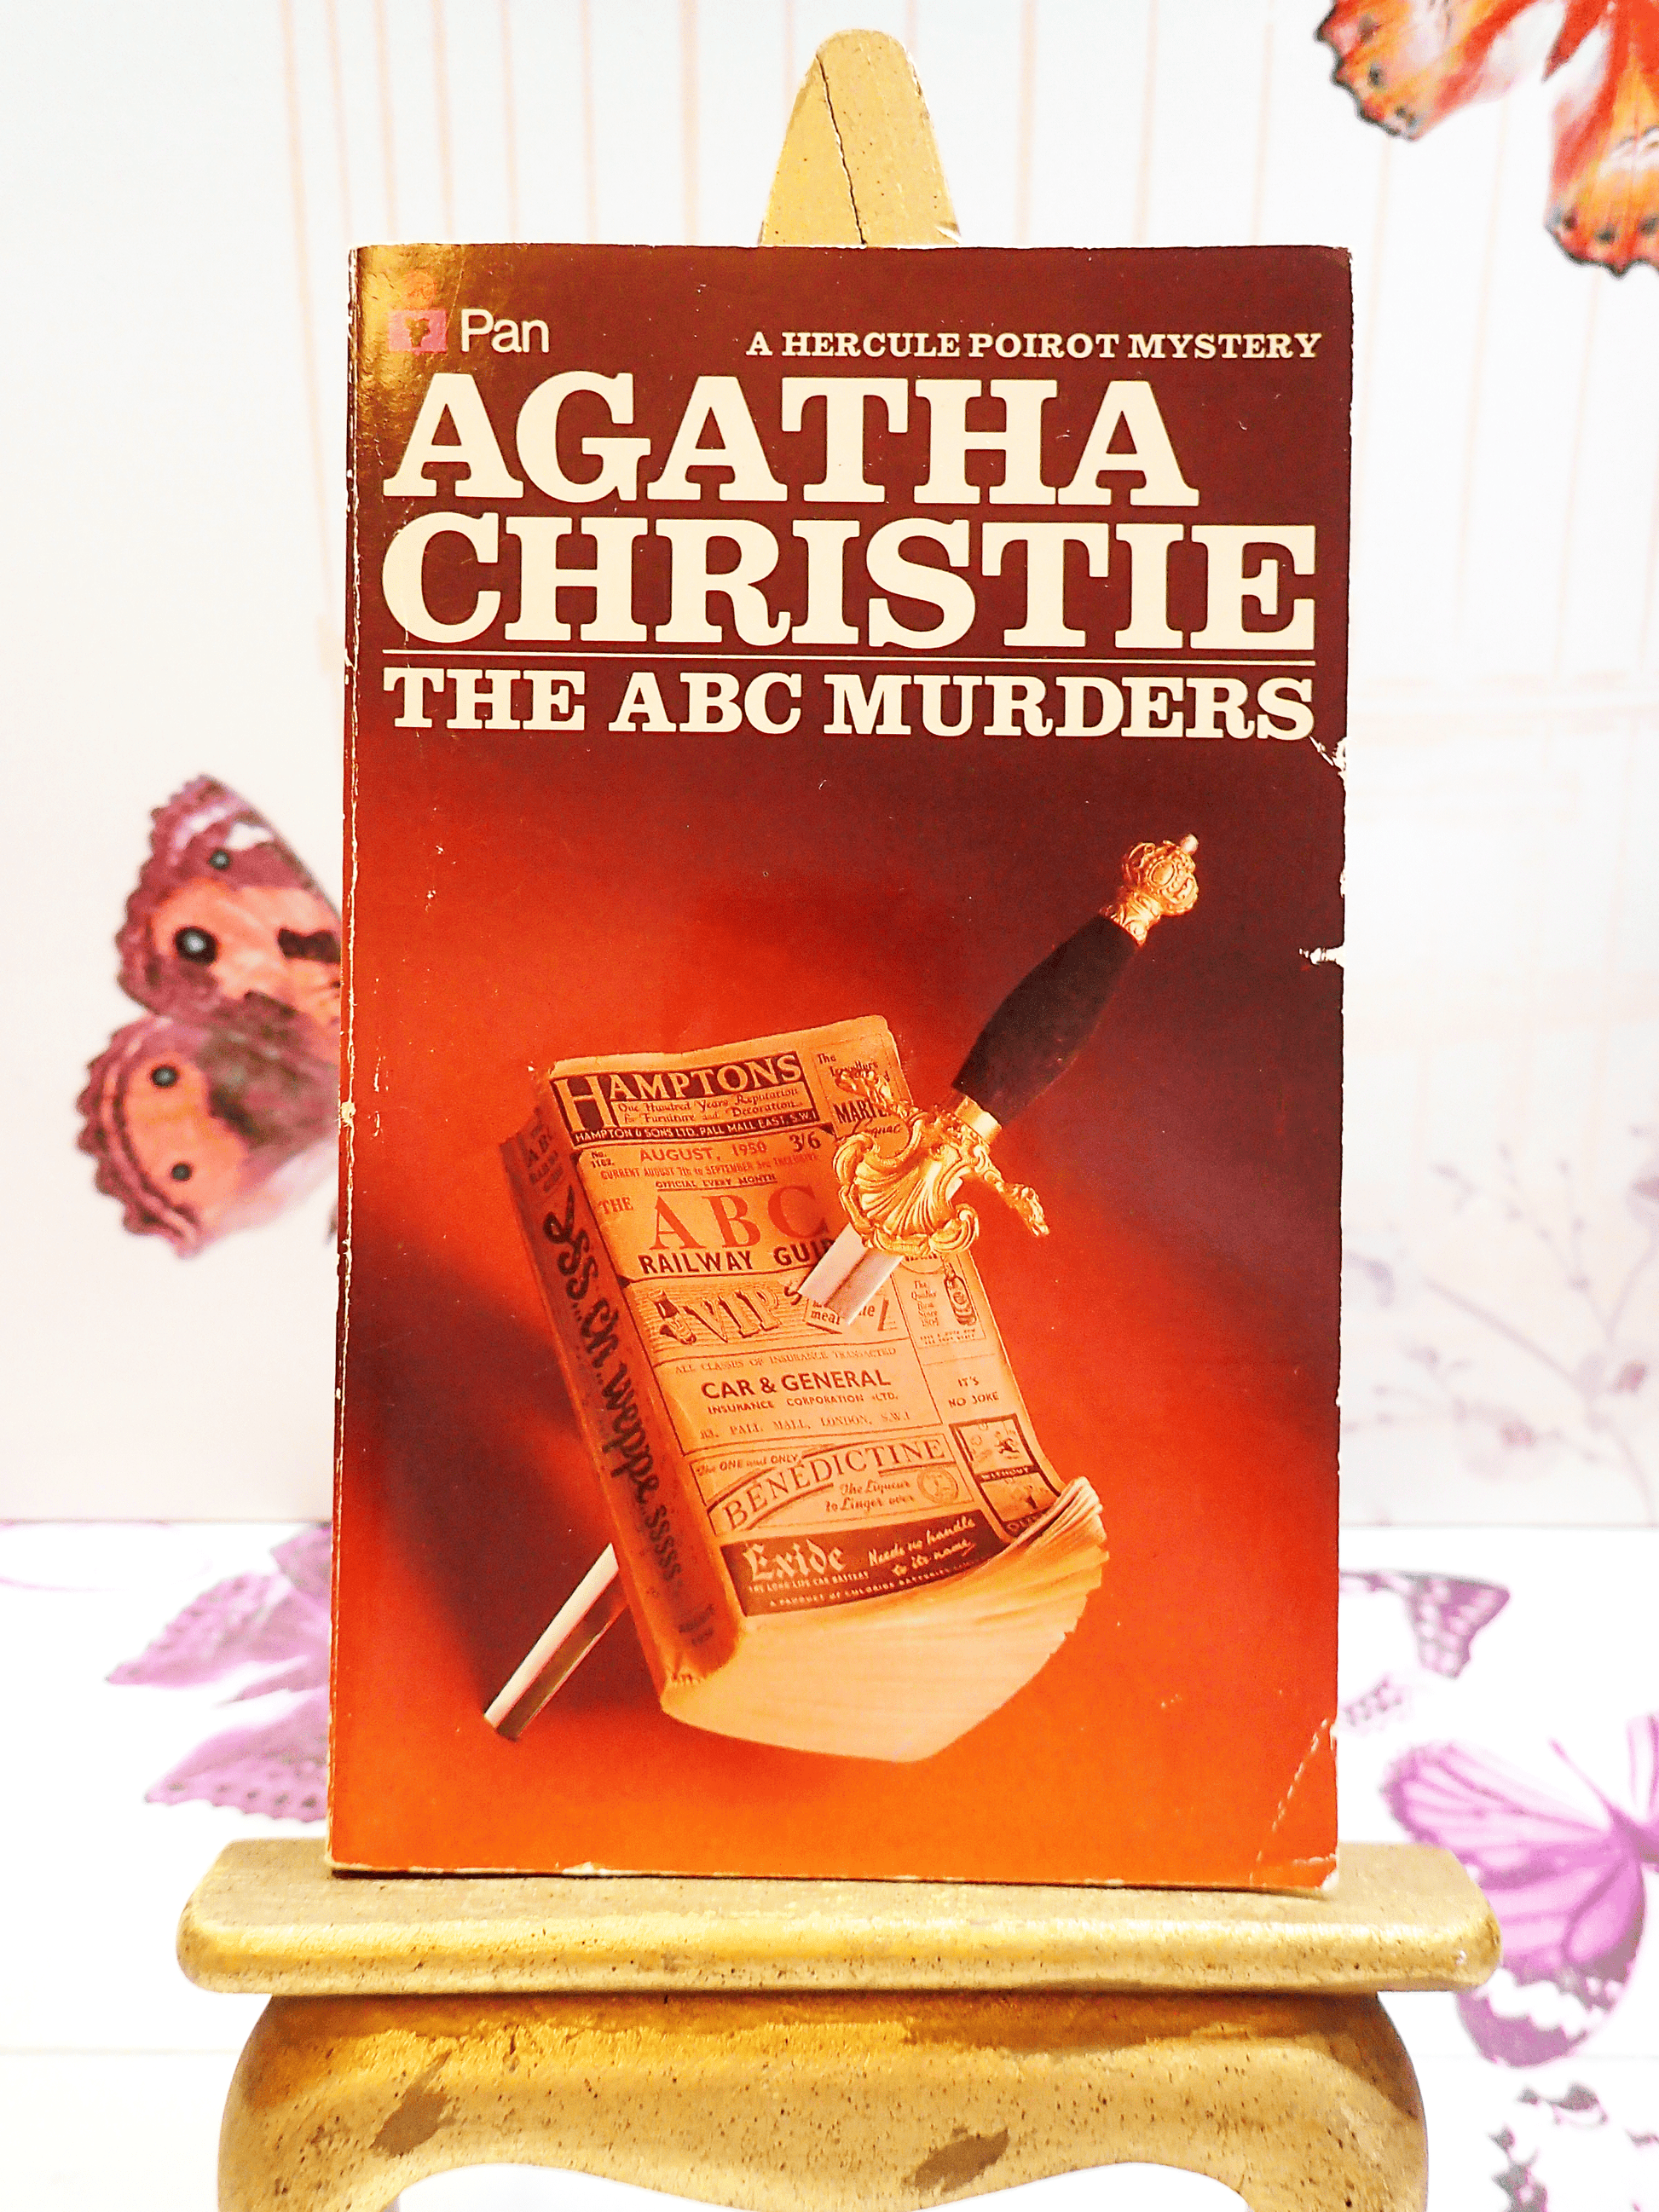 Front Cover of Agatha Christie The ABC Murders, Vintage Pan Paperback Book. Classic Crime Fiction. Showing an ABC Railway guide with a dagger through it against a blood red background. 